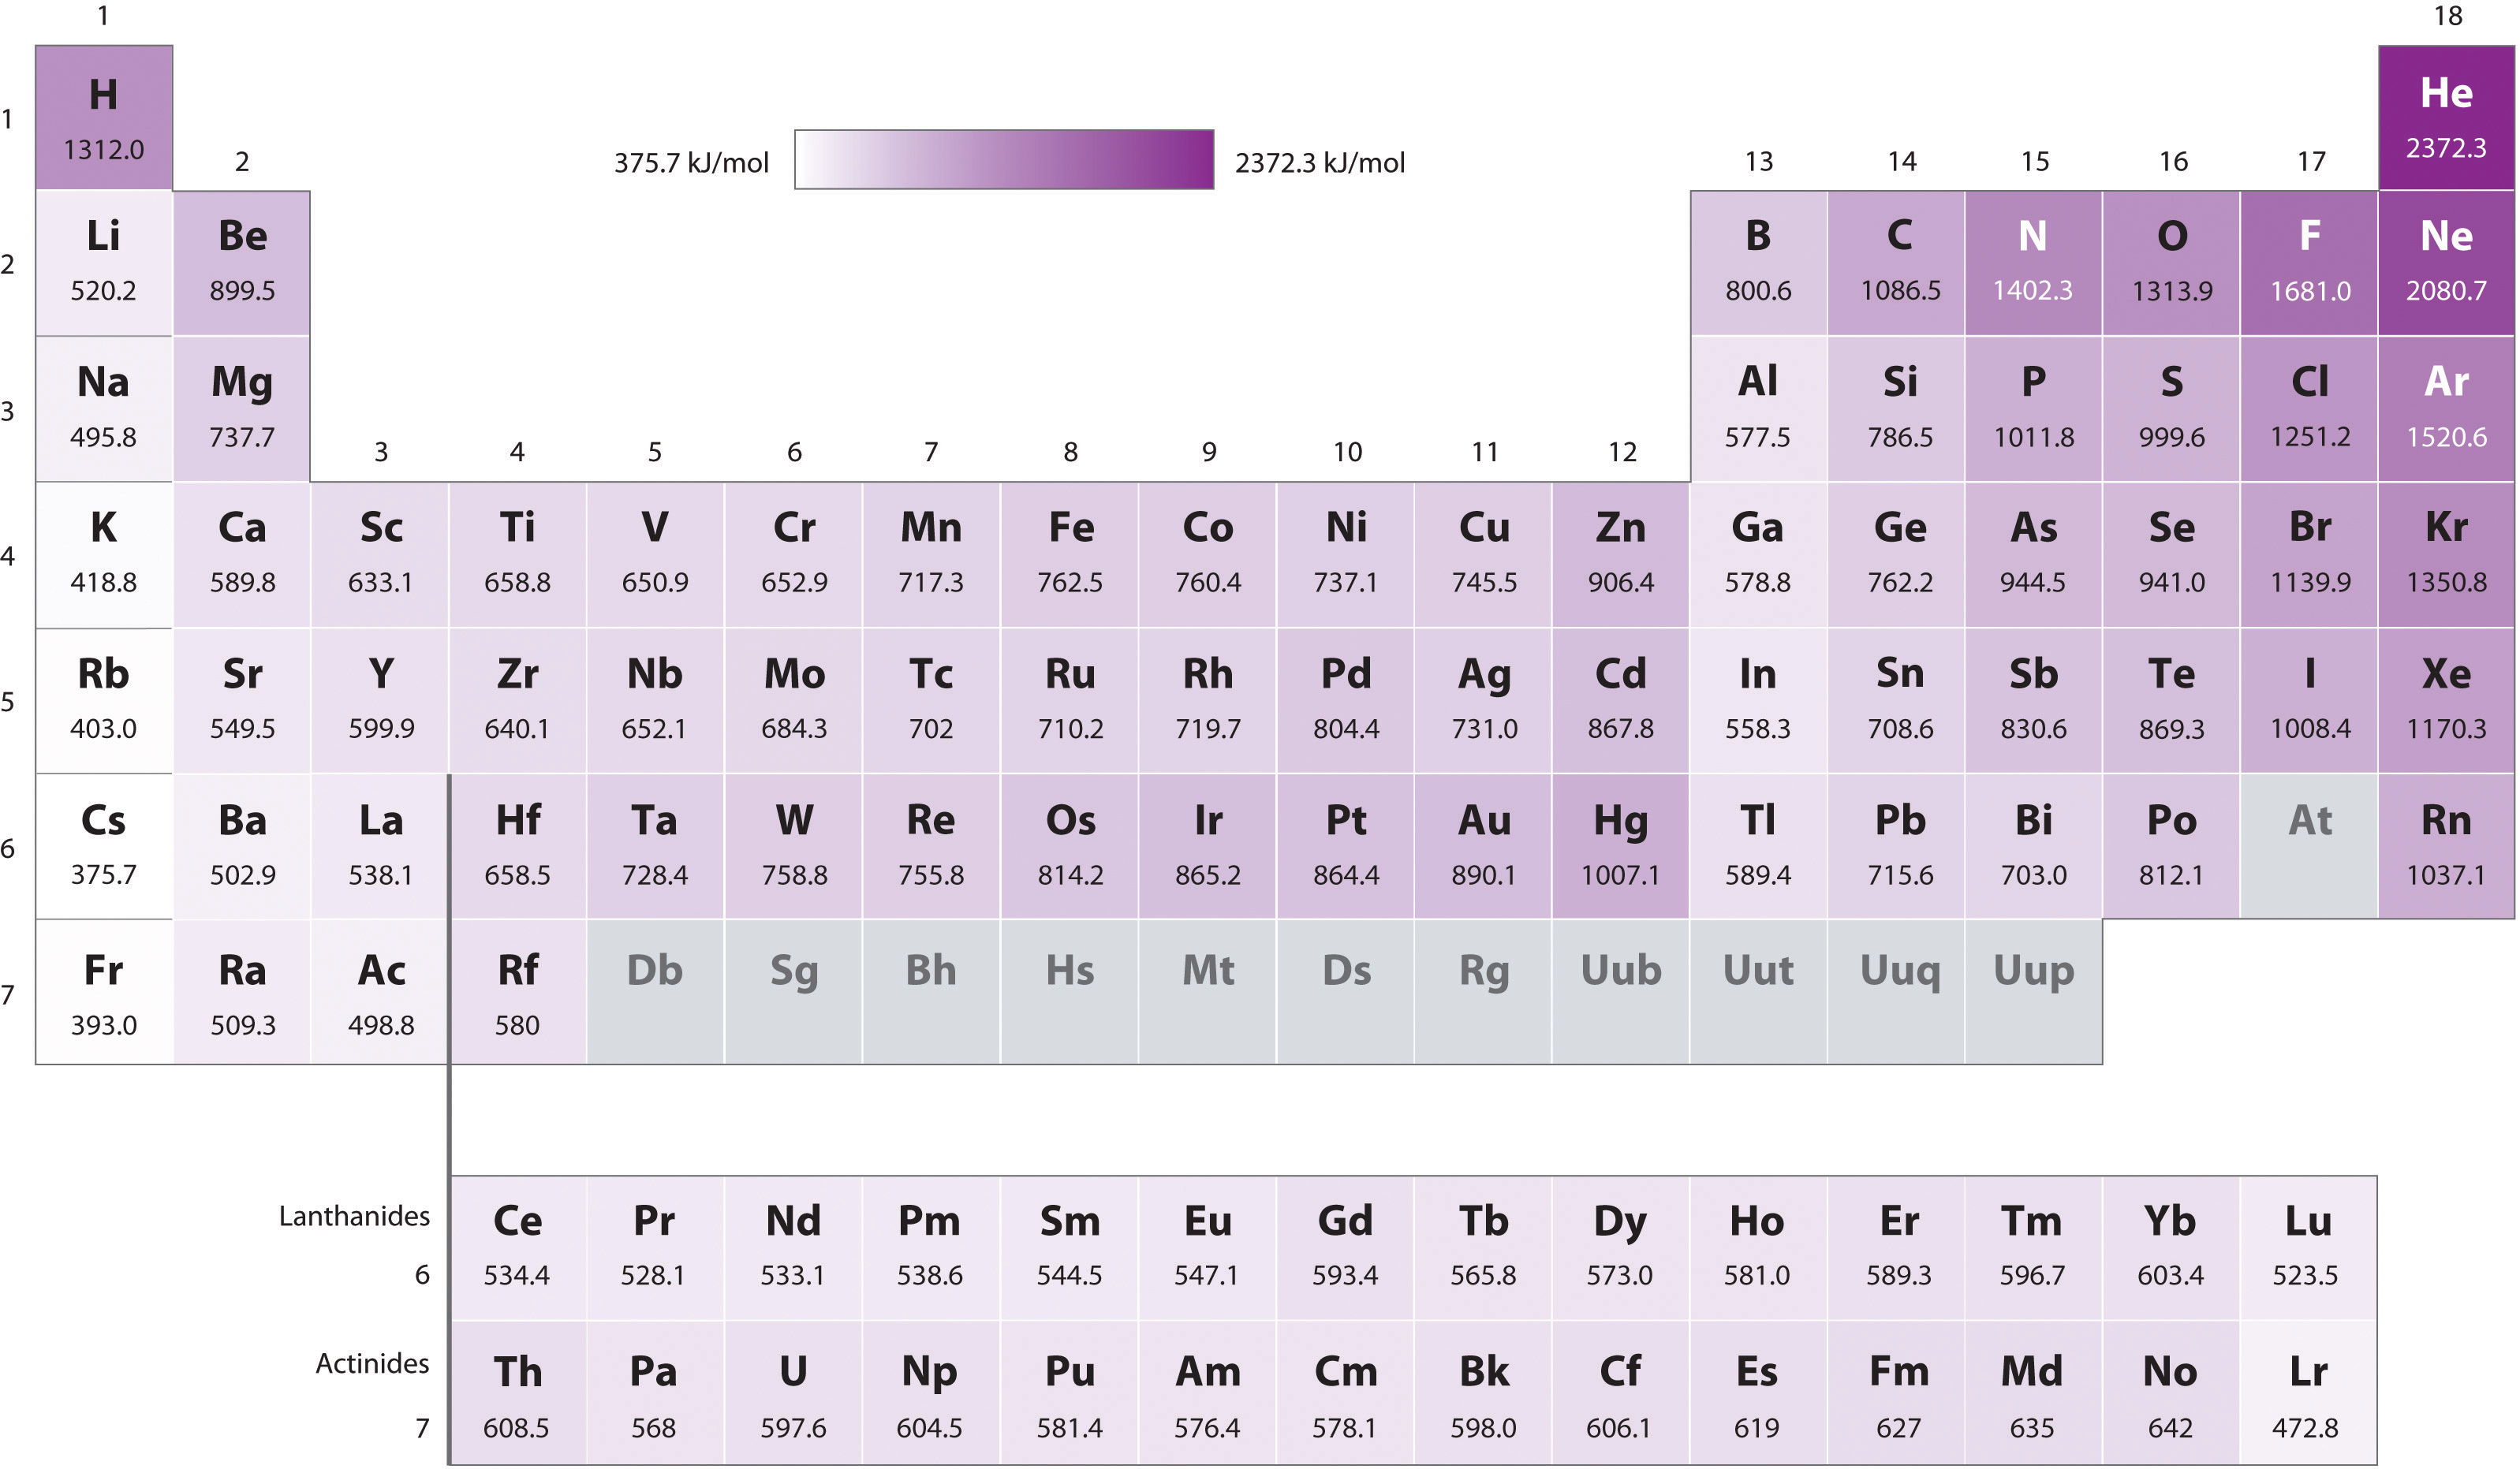 The periodic table is colored with different shades of purple. The general trend observed here is that the purple gets darker across a period. All of the lightest colors are found on the left side of the periodic table and the darkest colors are found among the noble gas group.  